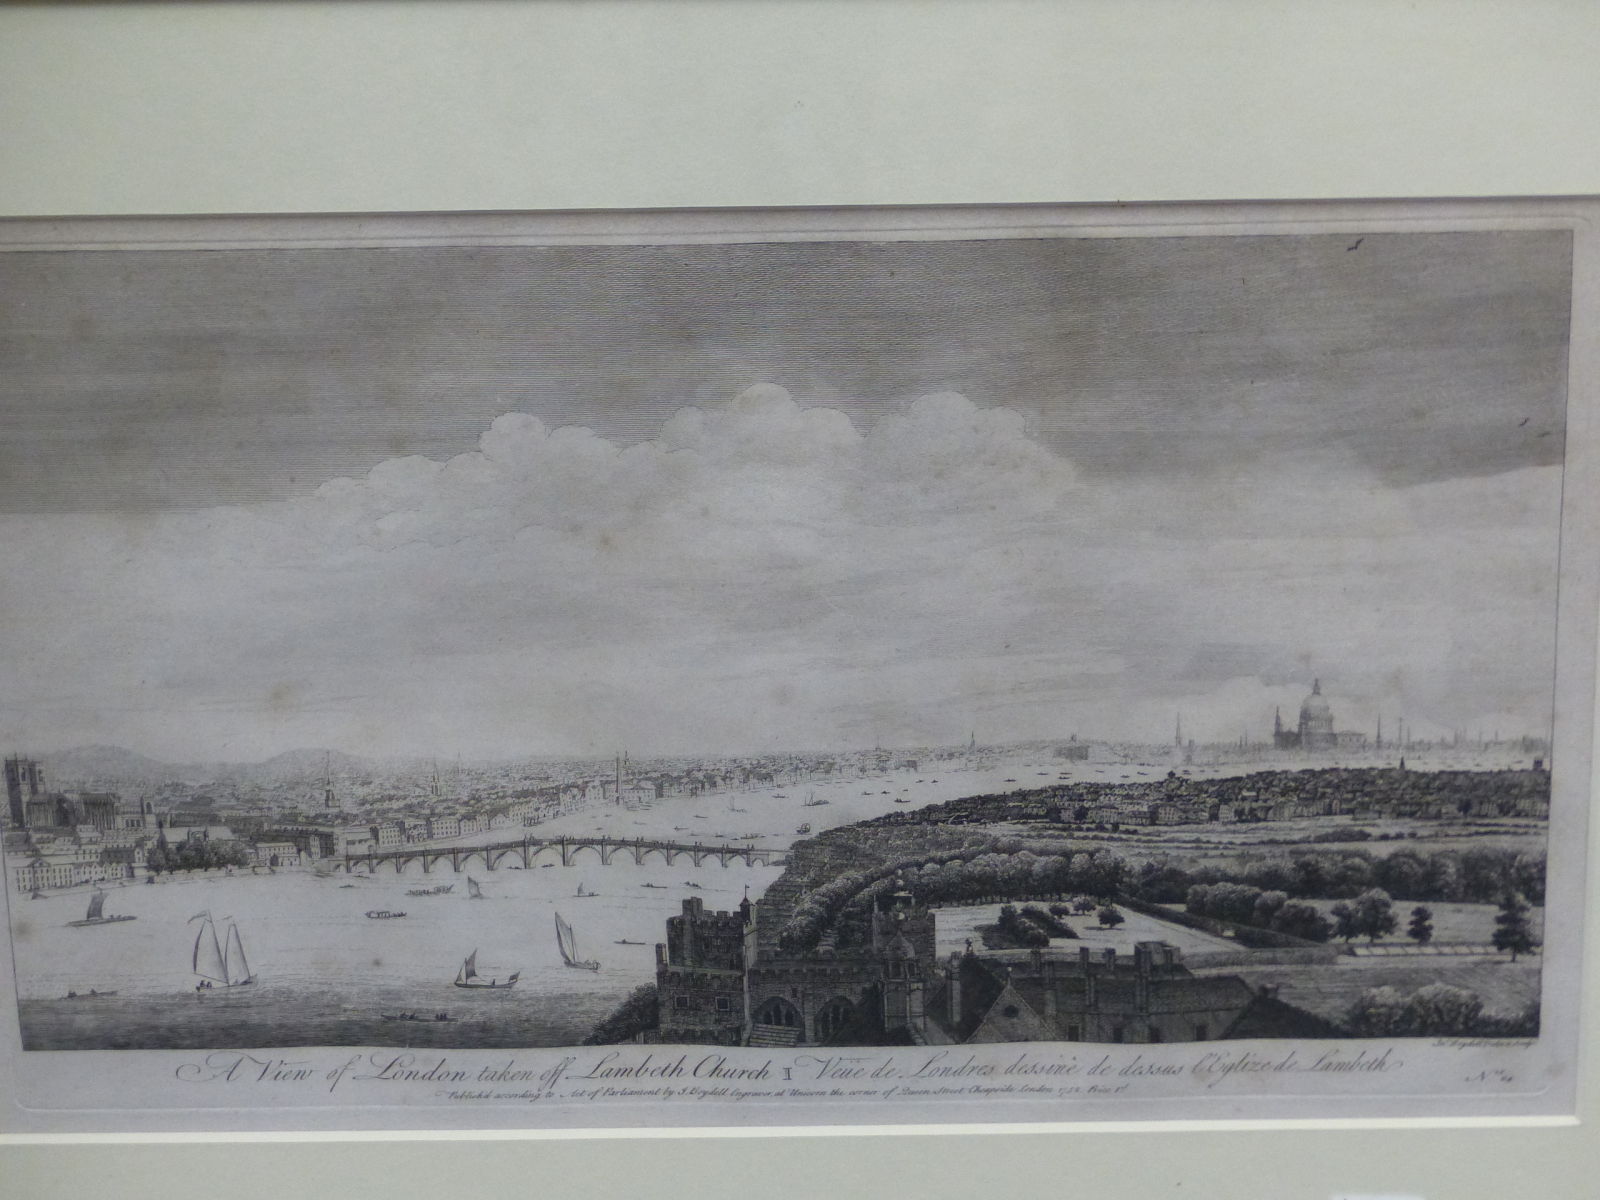 A COLLECTION OF ANTIQUE LANDSCAPE PRINTS, VIEWS OF LONDON, THE RIVER THAMES ETC SIZES VARY